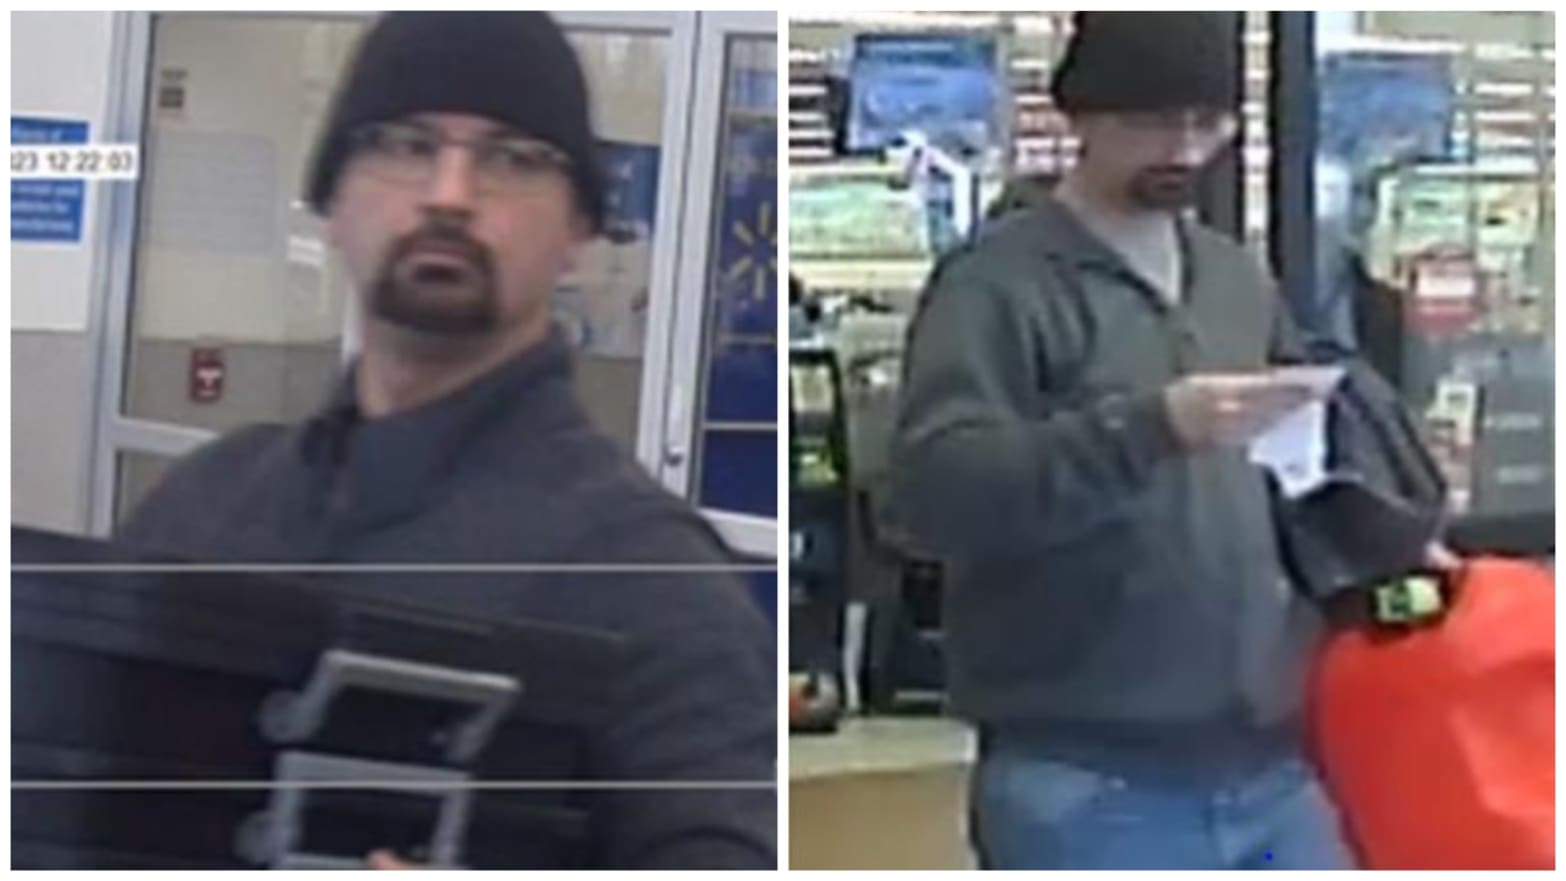 Side-by-side photos of Michael Avery, taken from security footage at a gas station.